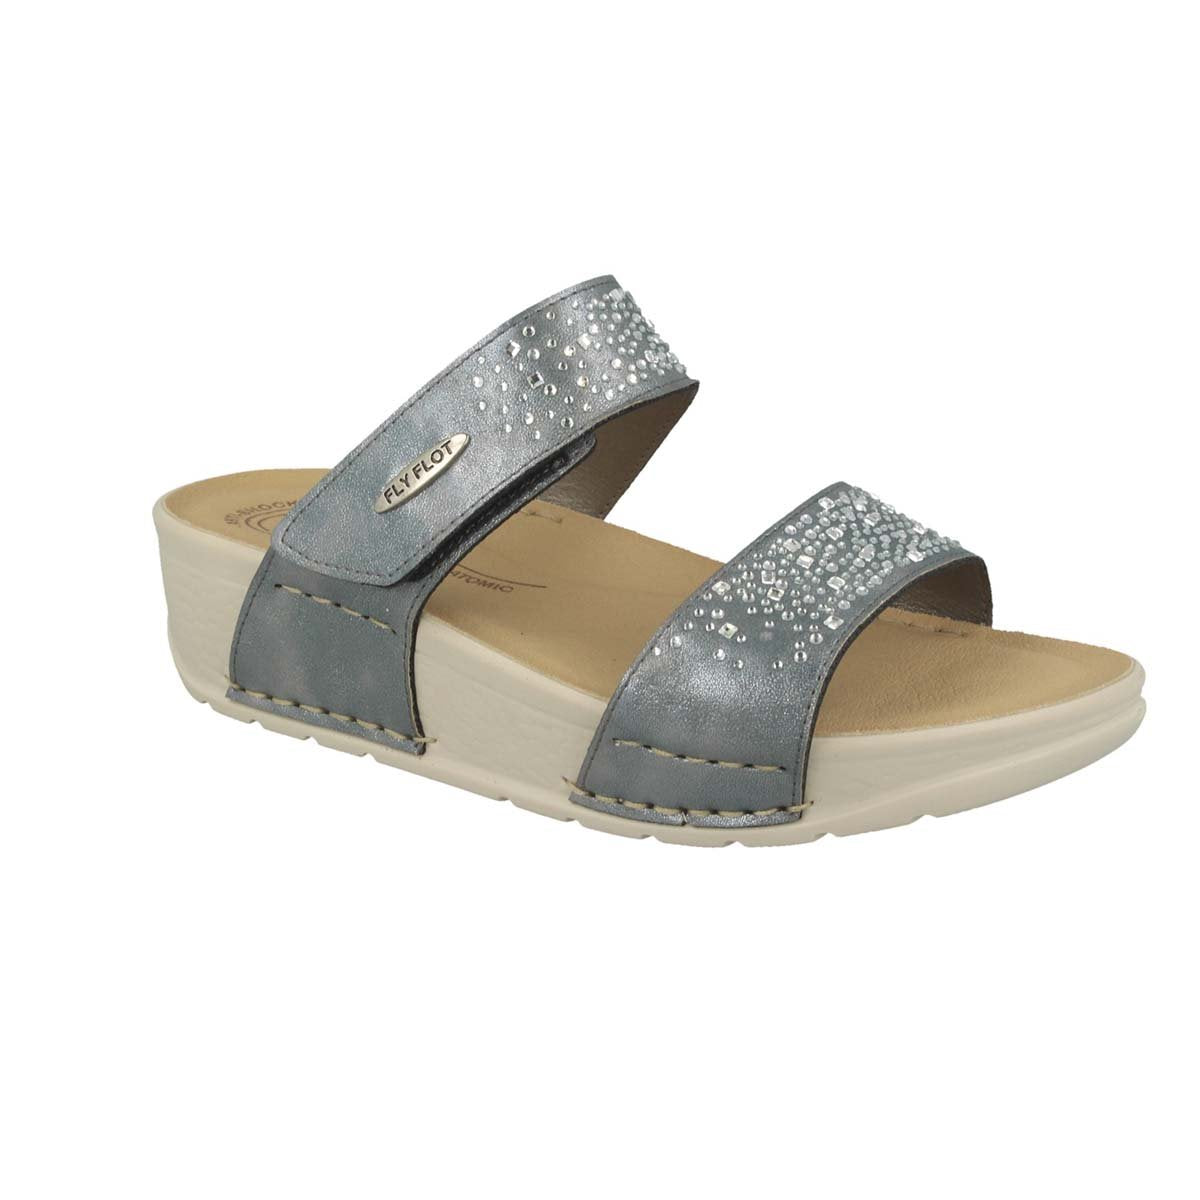 See the Strap With Velcro Embellished Slide Women Sandals With Soft Microfiber Upper And Faux Leather Insole in the colour BLACK, available in various sizes